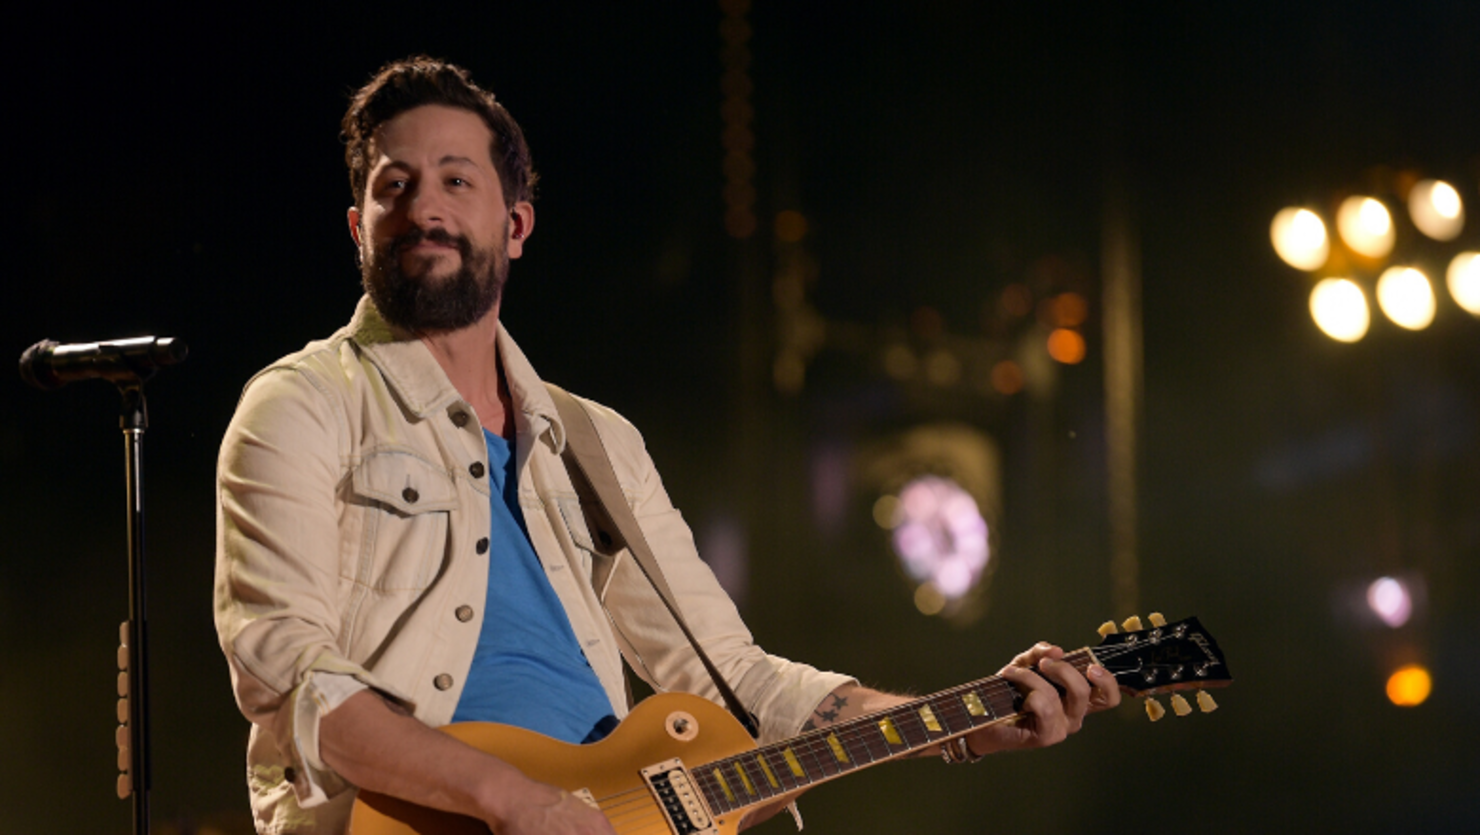 Old Dominion's Matthew Ramsey: 'Focus Your Hearts On Healing'